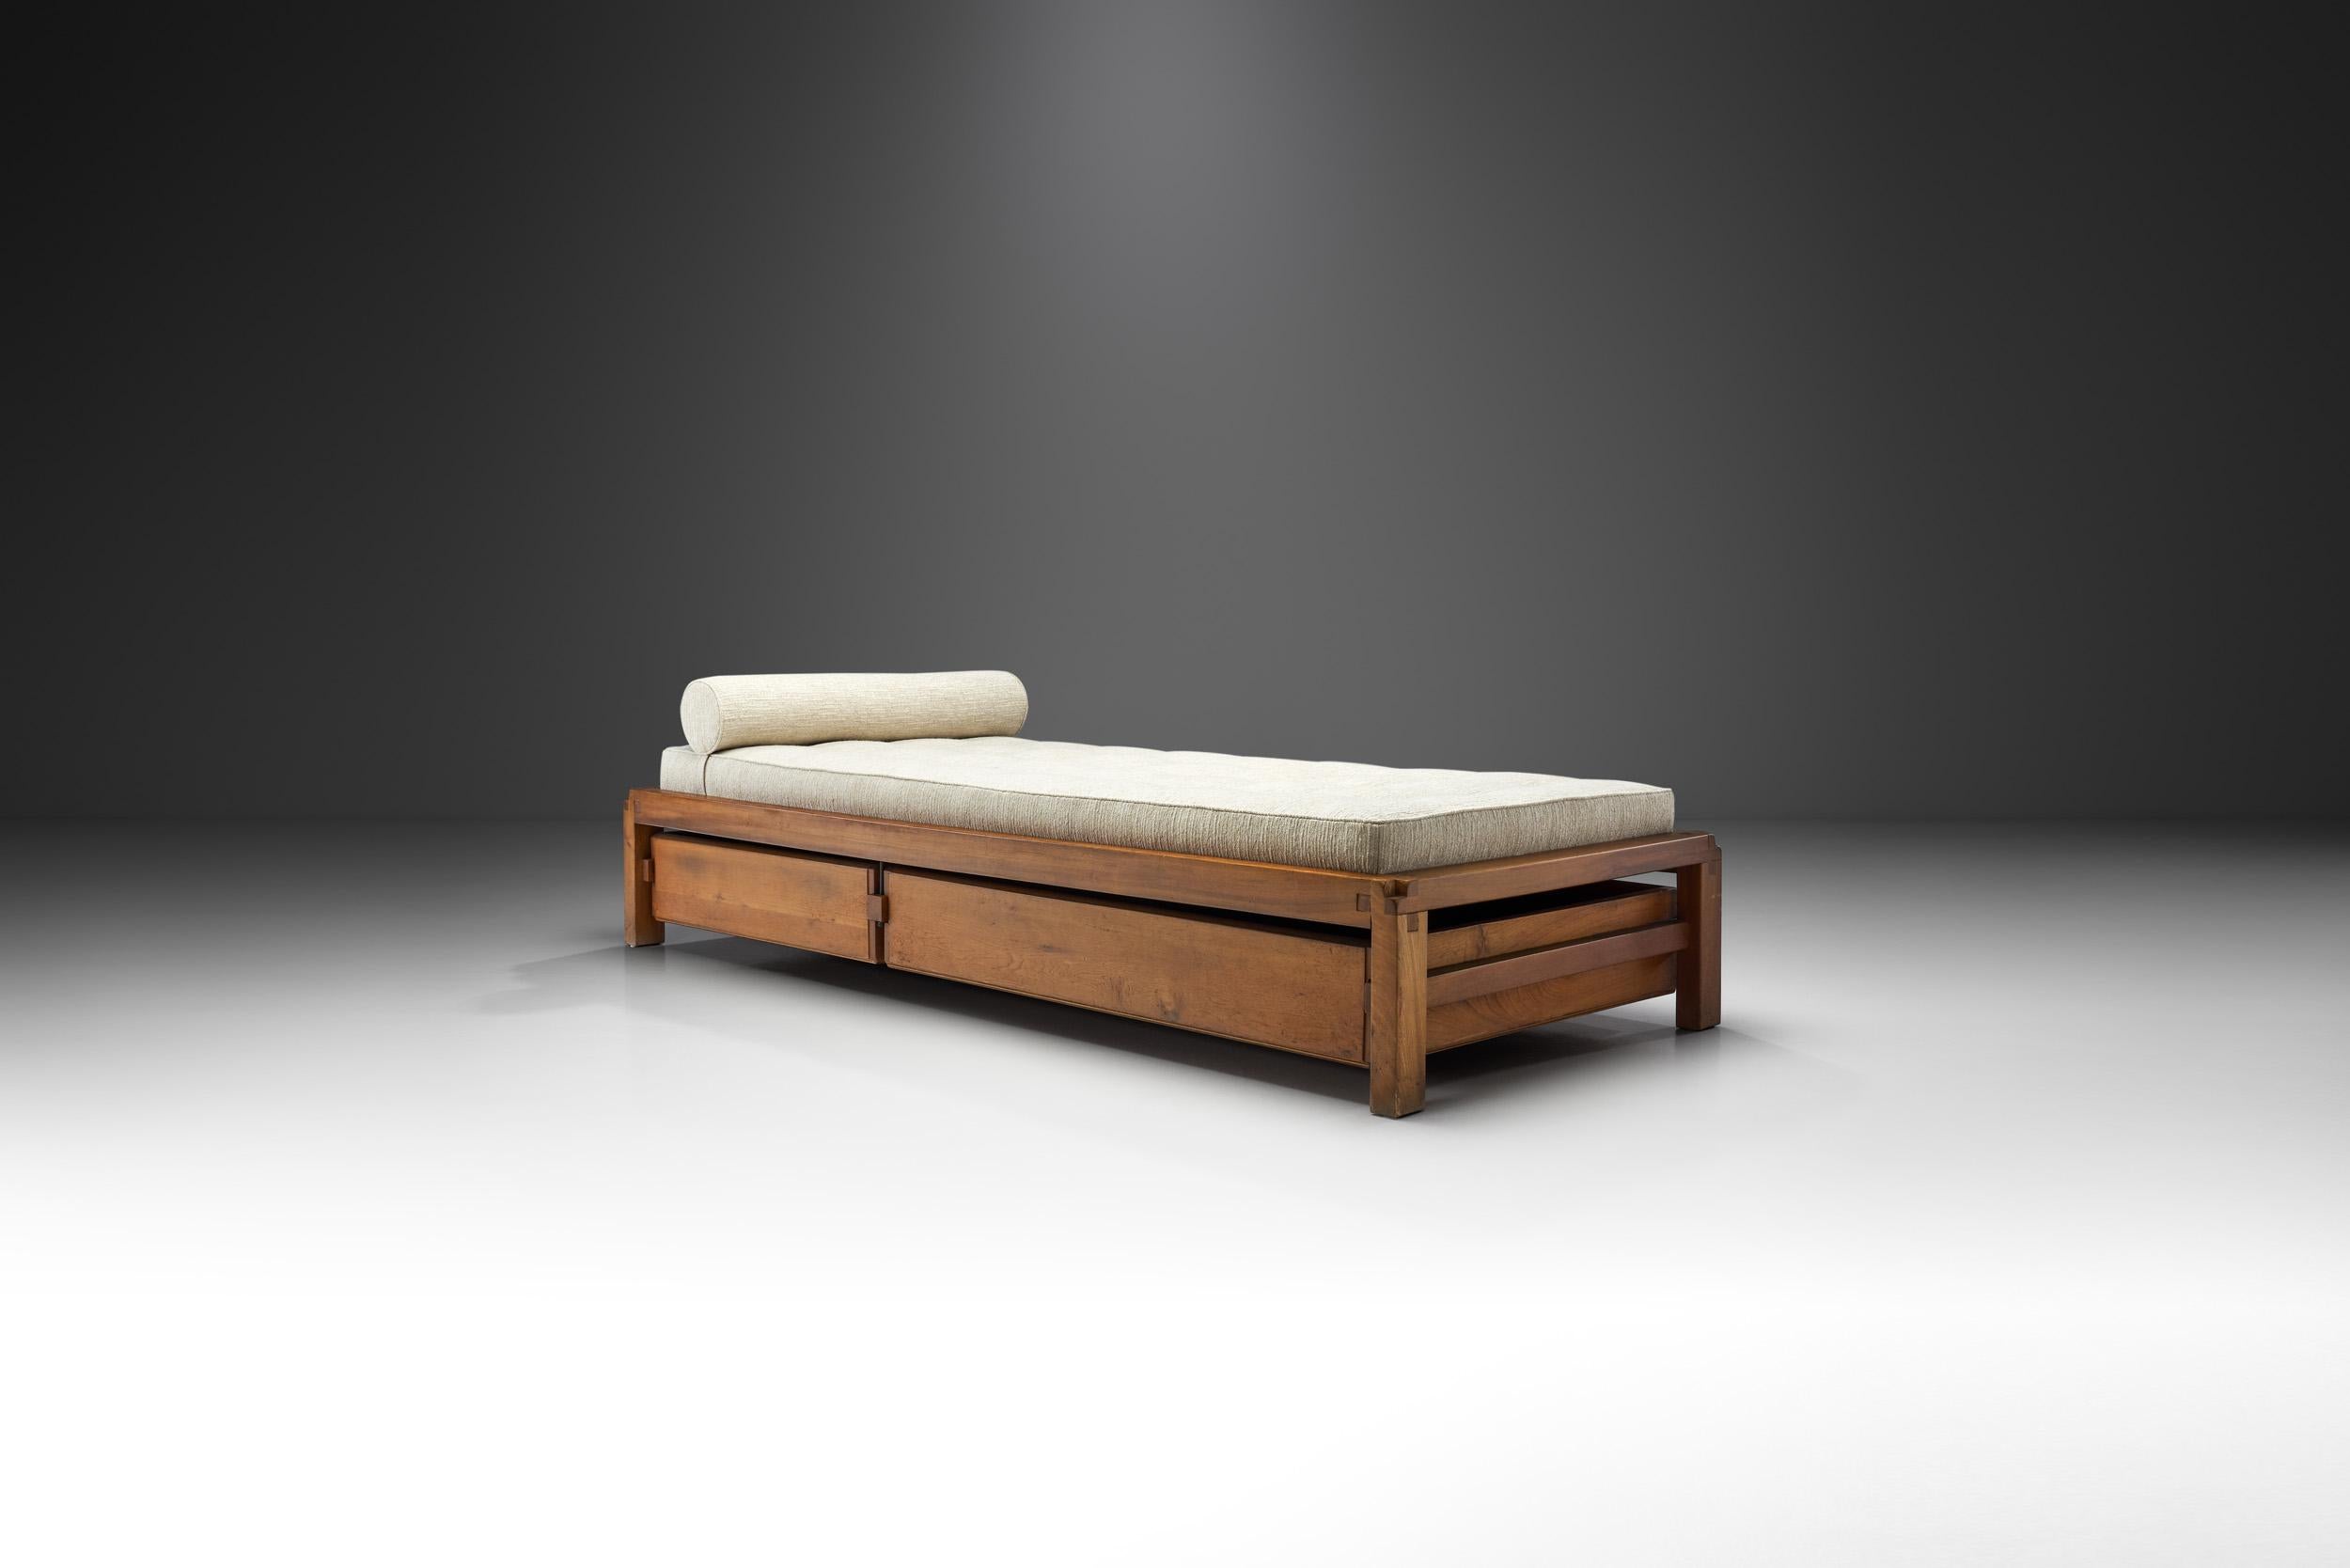 This daybed - like all Chapo designs - have the designer’s characteristic wood joinery that is impeccable and testifies of his woodworking mastery. This daybed is said to have been designed around the end of the 1960s, and like back in its time, it